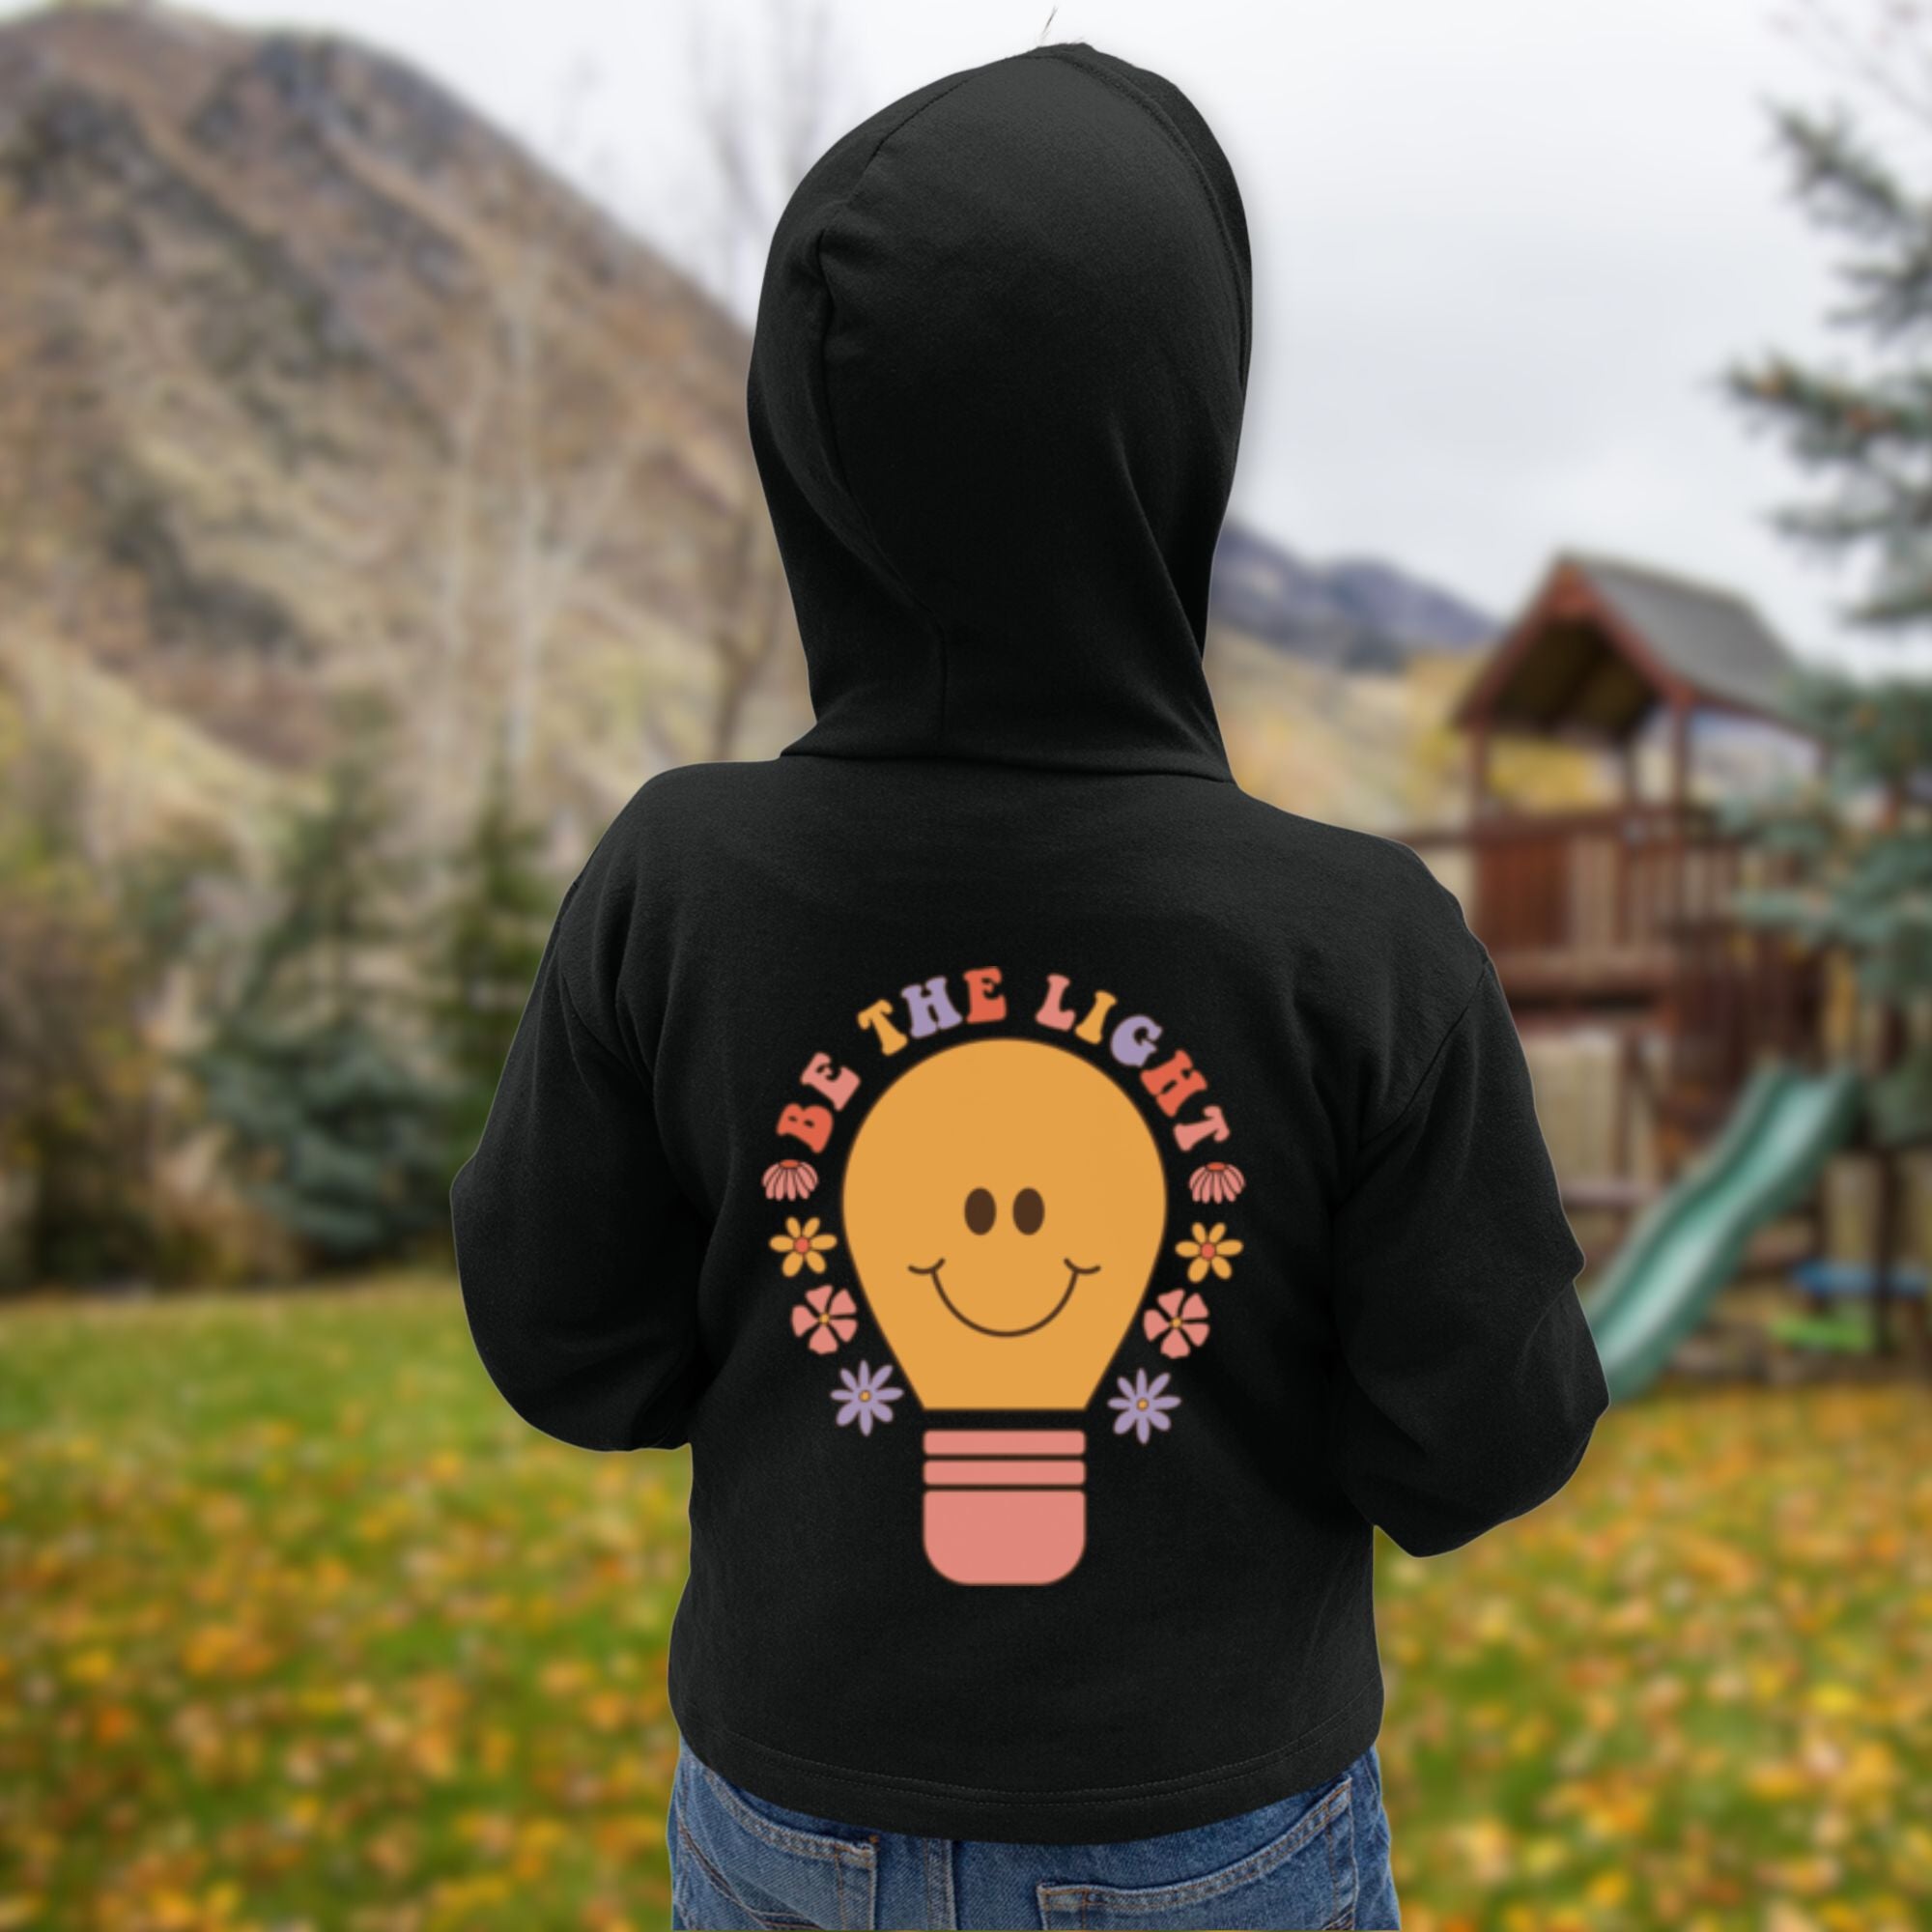 Be The Light Toddler Jacket Full-Zip Fleece - Design on Back Only Size: 2T Color: Heather Jesus Passion Apparel